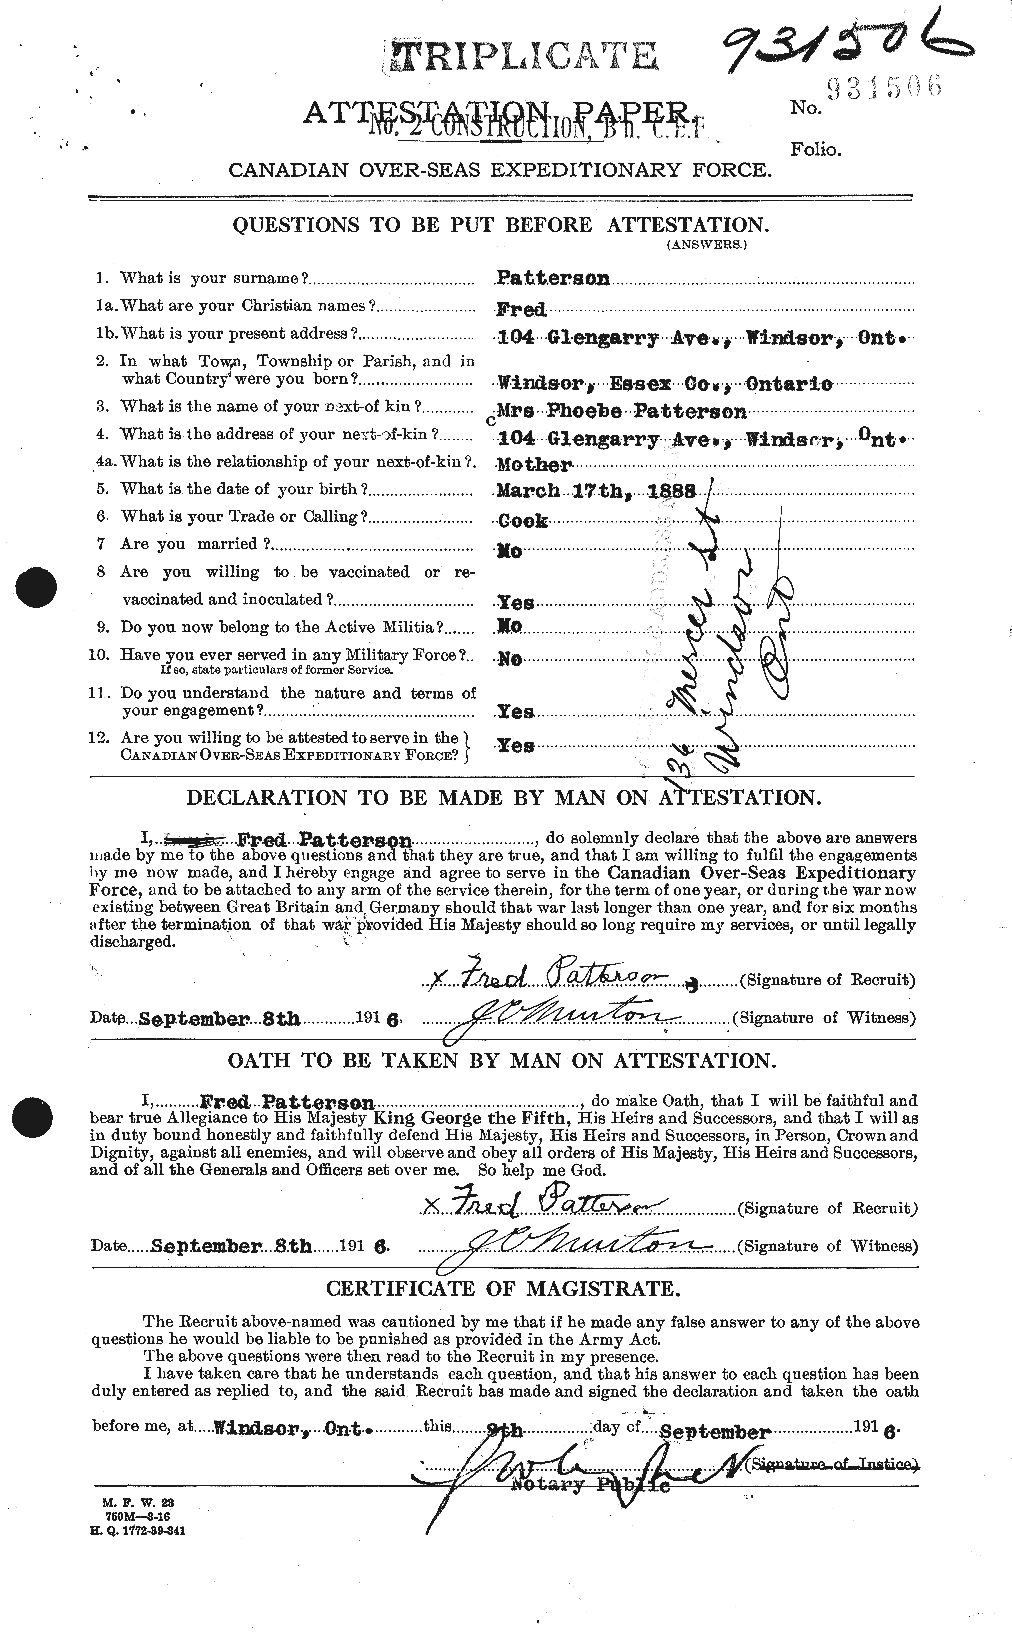 Personnel Records of the First World War - CEF 568385a